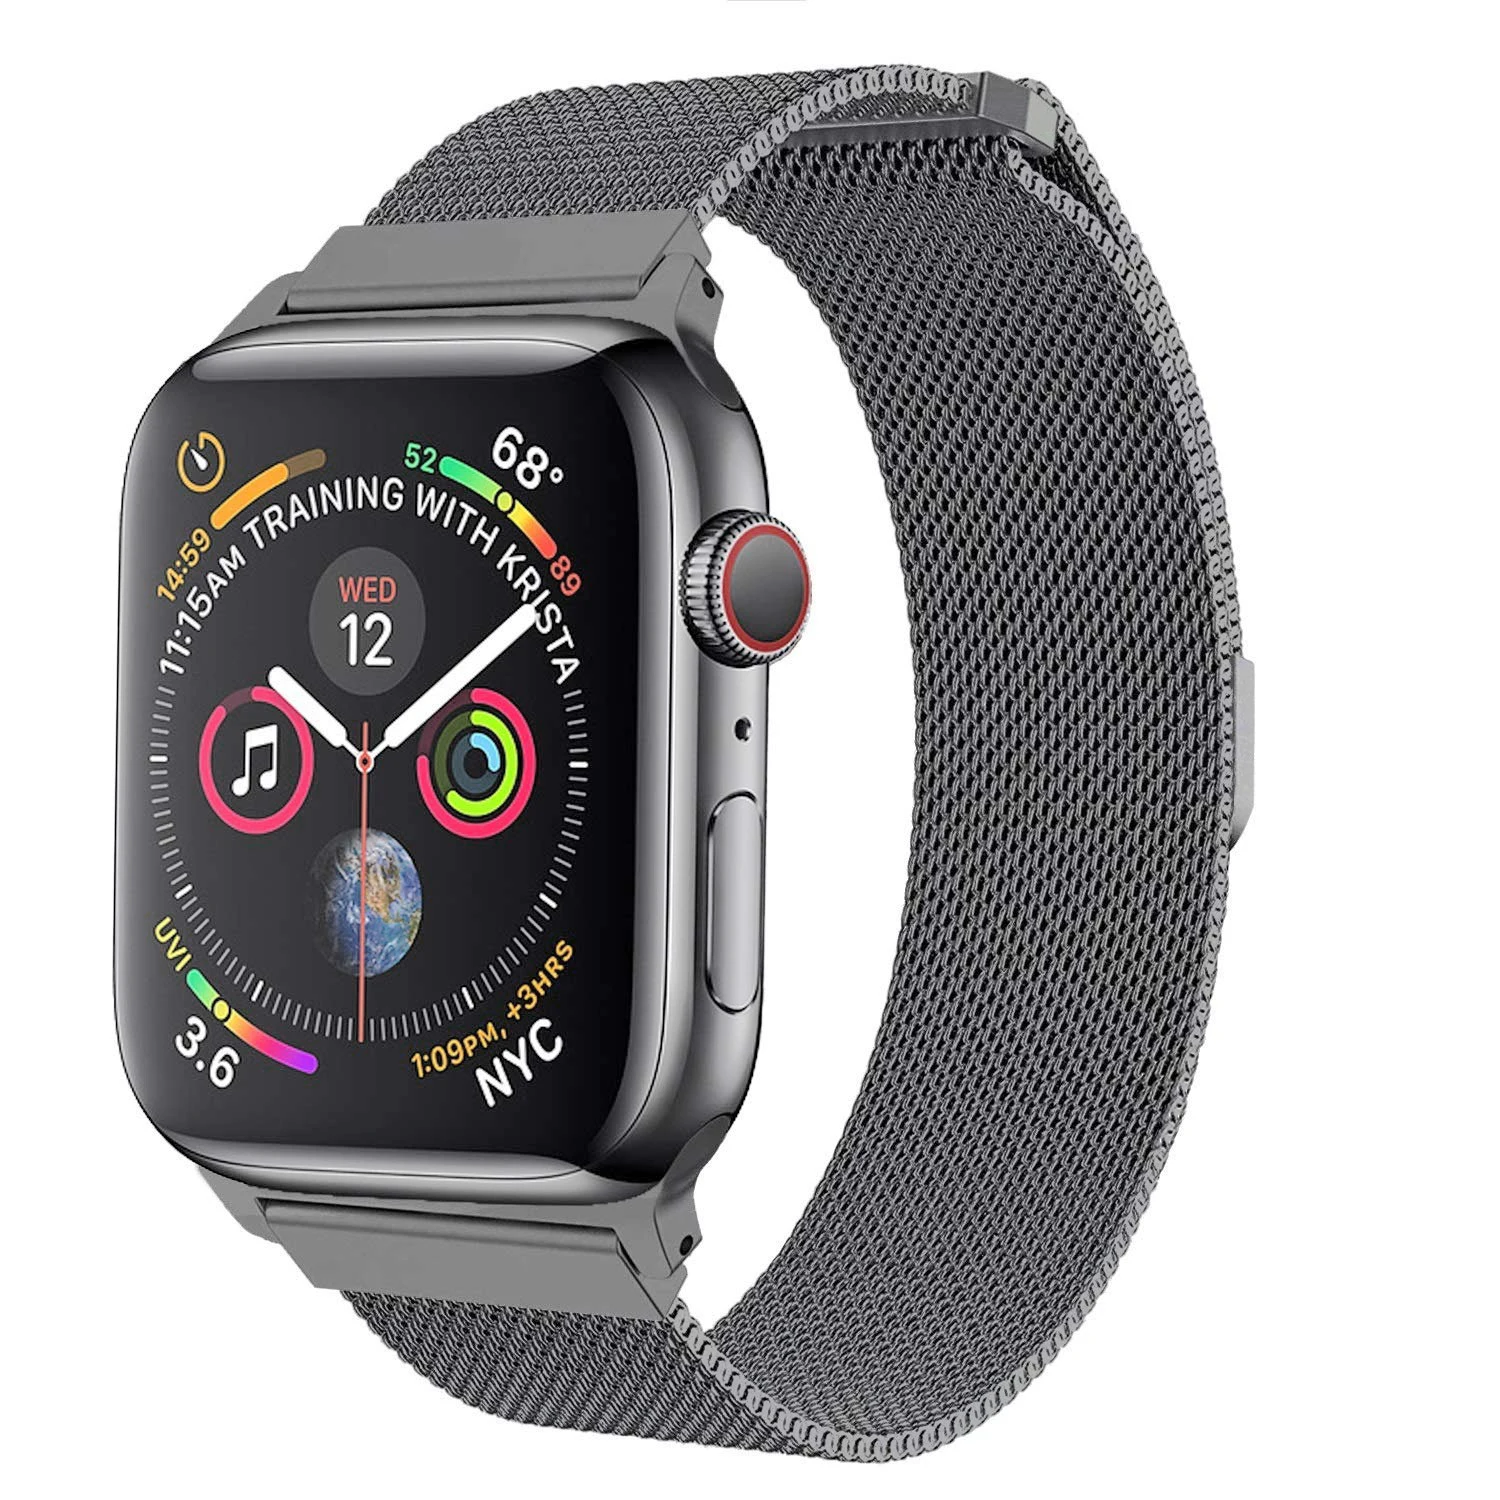 

ShanHai For Apple Watch Band Mesh Milanese Loop Stainless Steel For iWatch Series 4 5 (40mm 44mm) Series 3 (38mm 42mm), Multi-color optional or customized